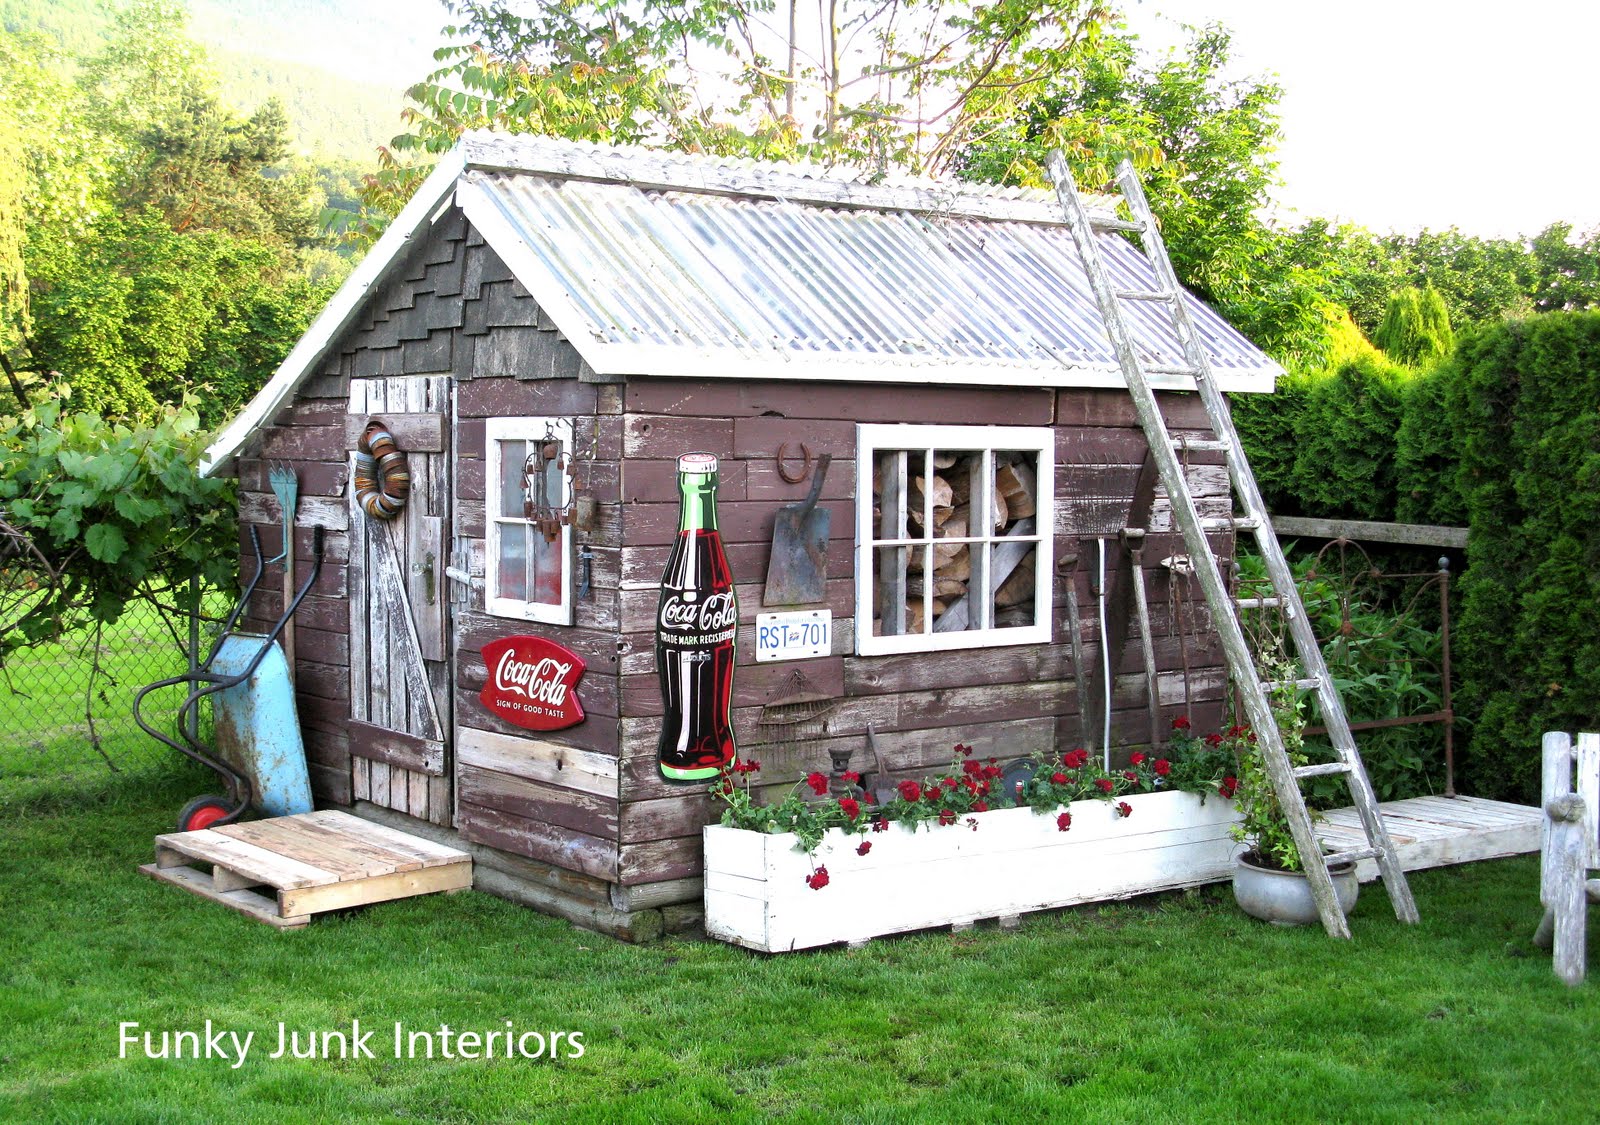 Decorating the great outdoors with junk for 'Gitter Done!' - Funky 